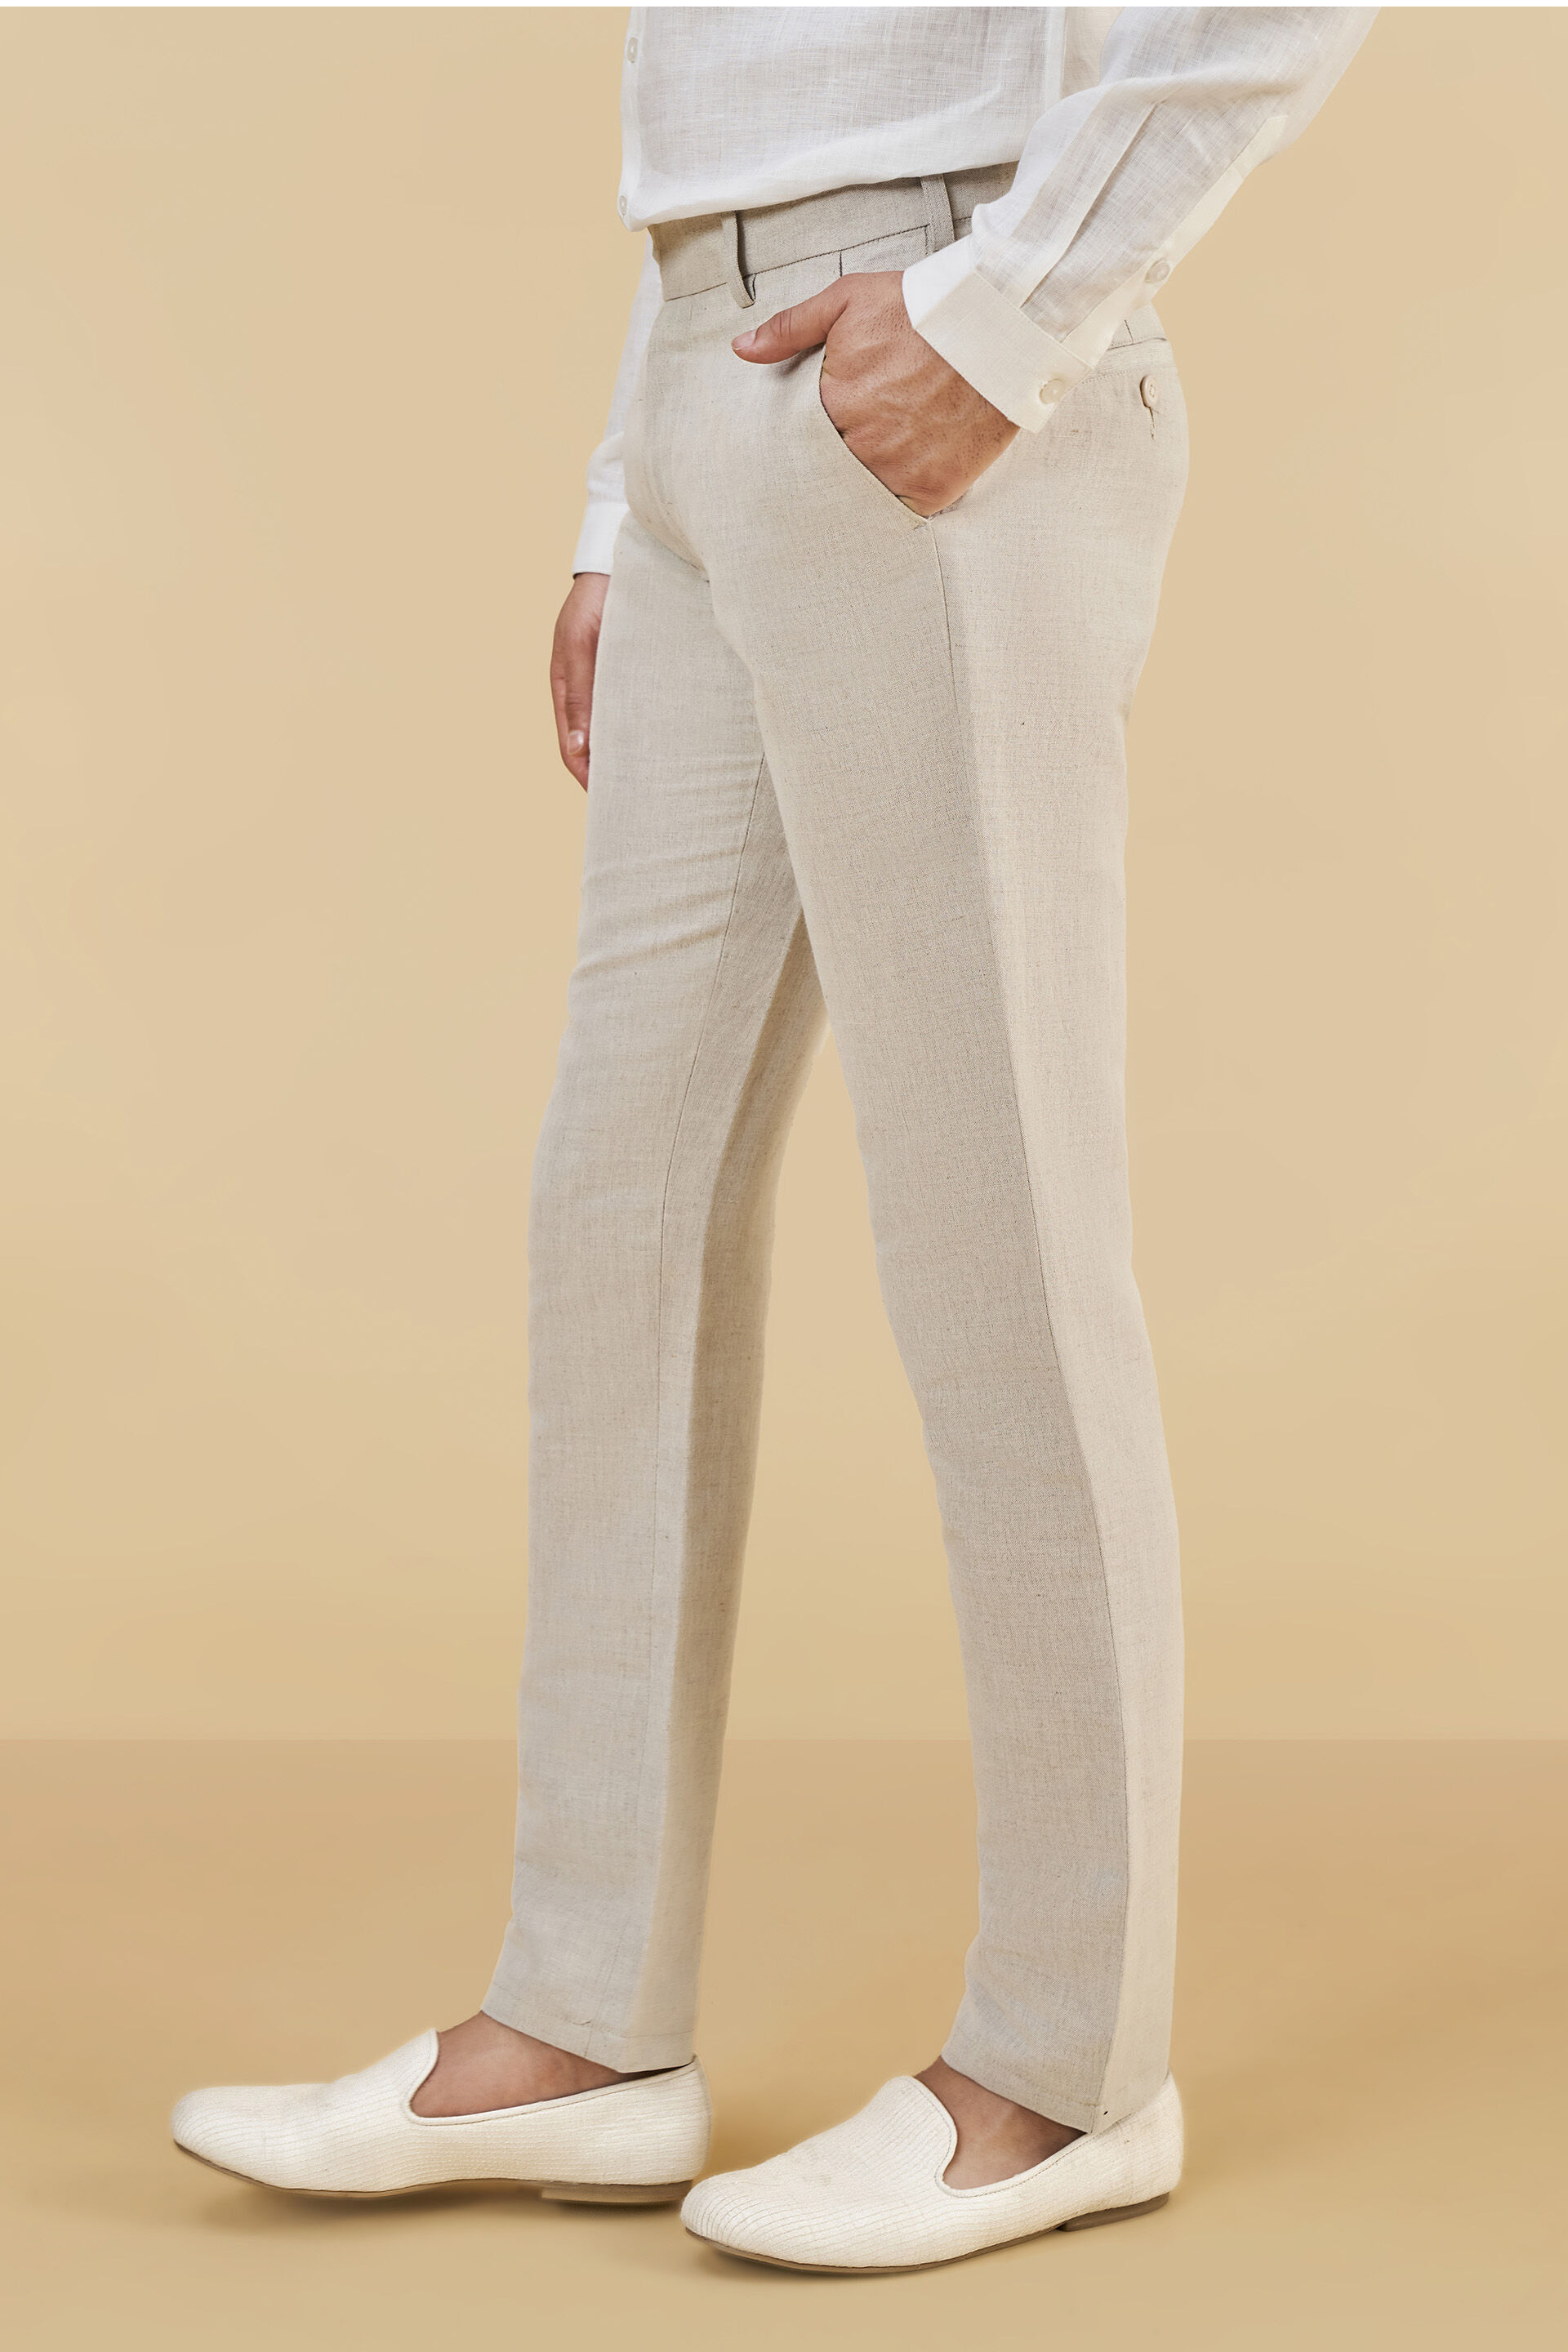 PEPPERMAYO | Isola Linen Pants in Blooming| FashionPass